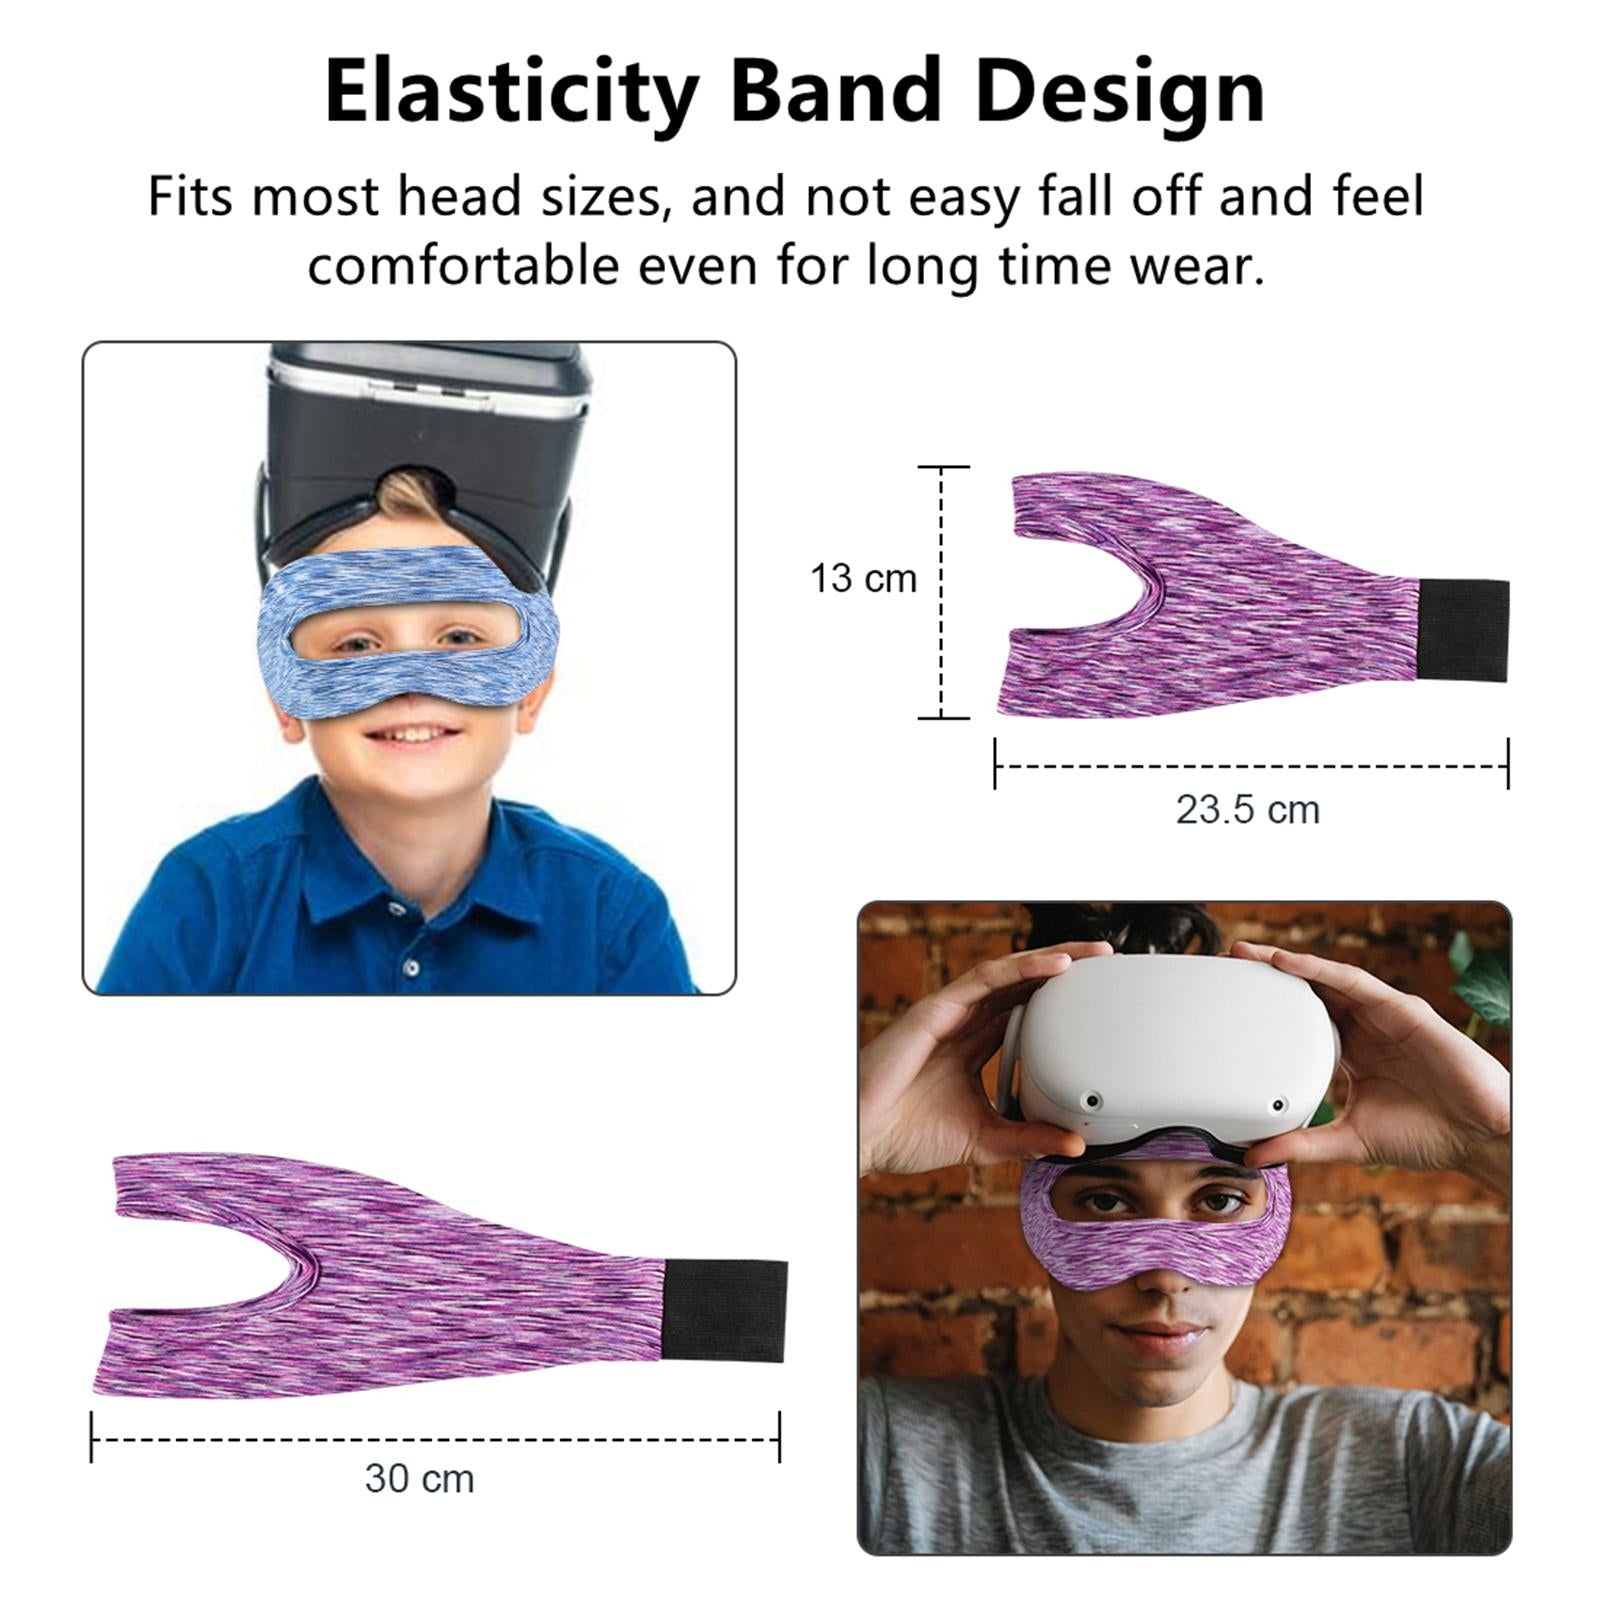 Virtual Reality VR Masks for Quest 2 Elastic Material Home Supplies Purple